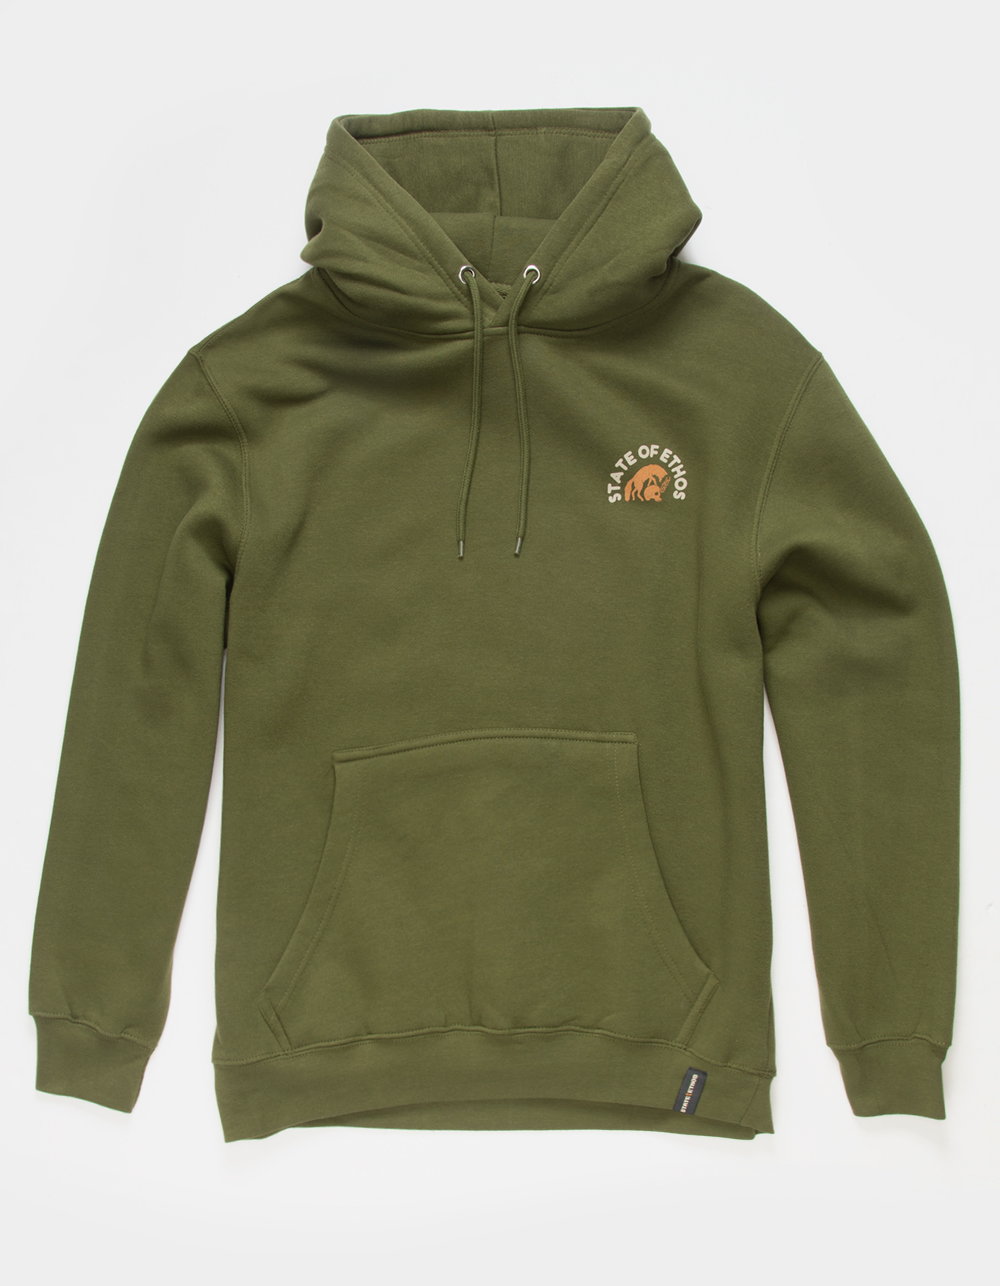 STATE OF ETHOS Icono Mens Hoodie - ARMY | Tillys